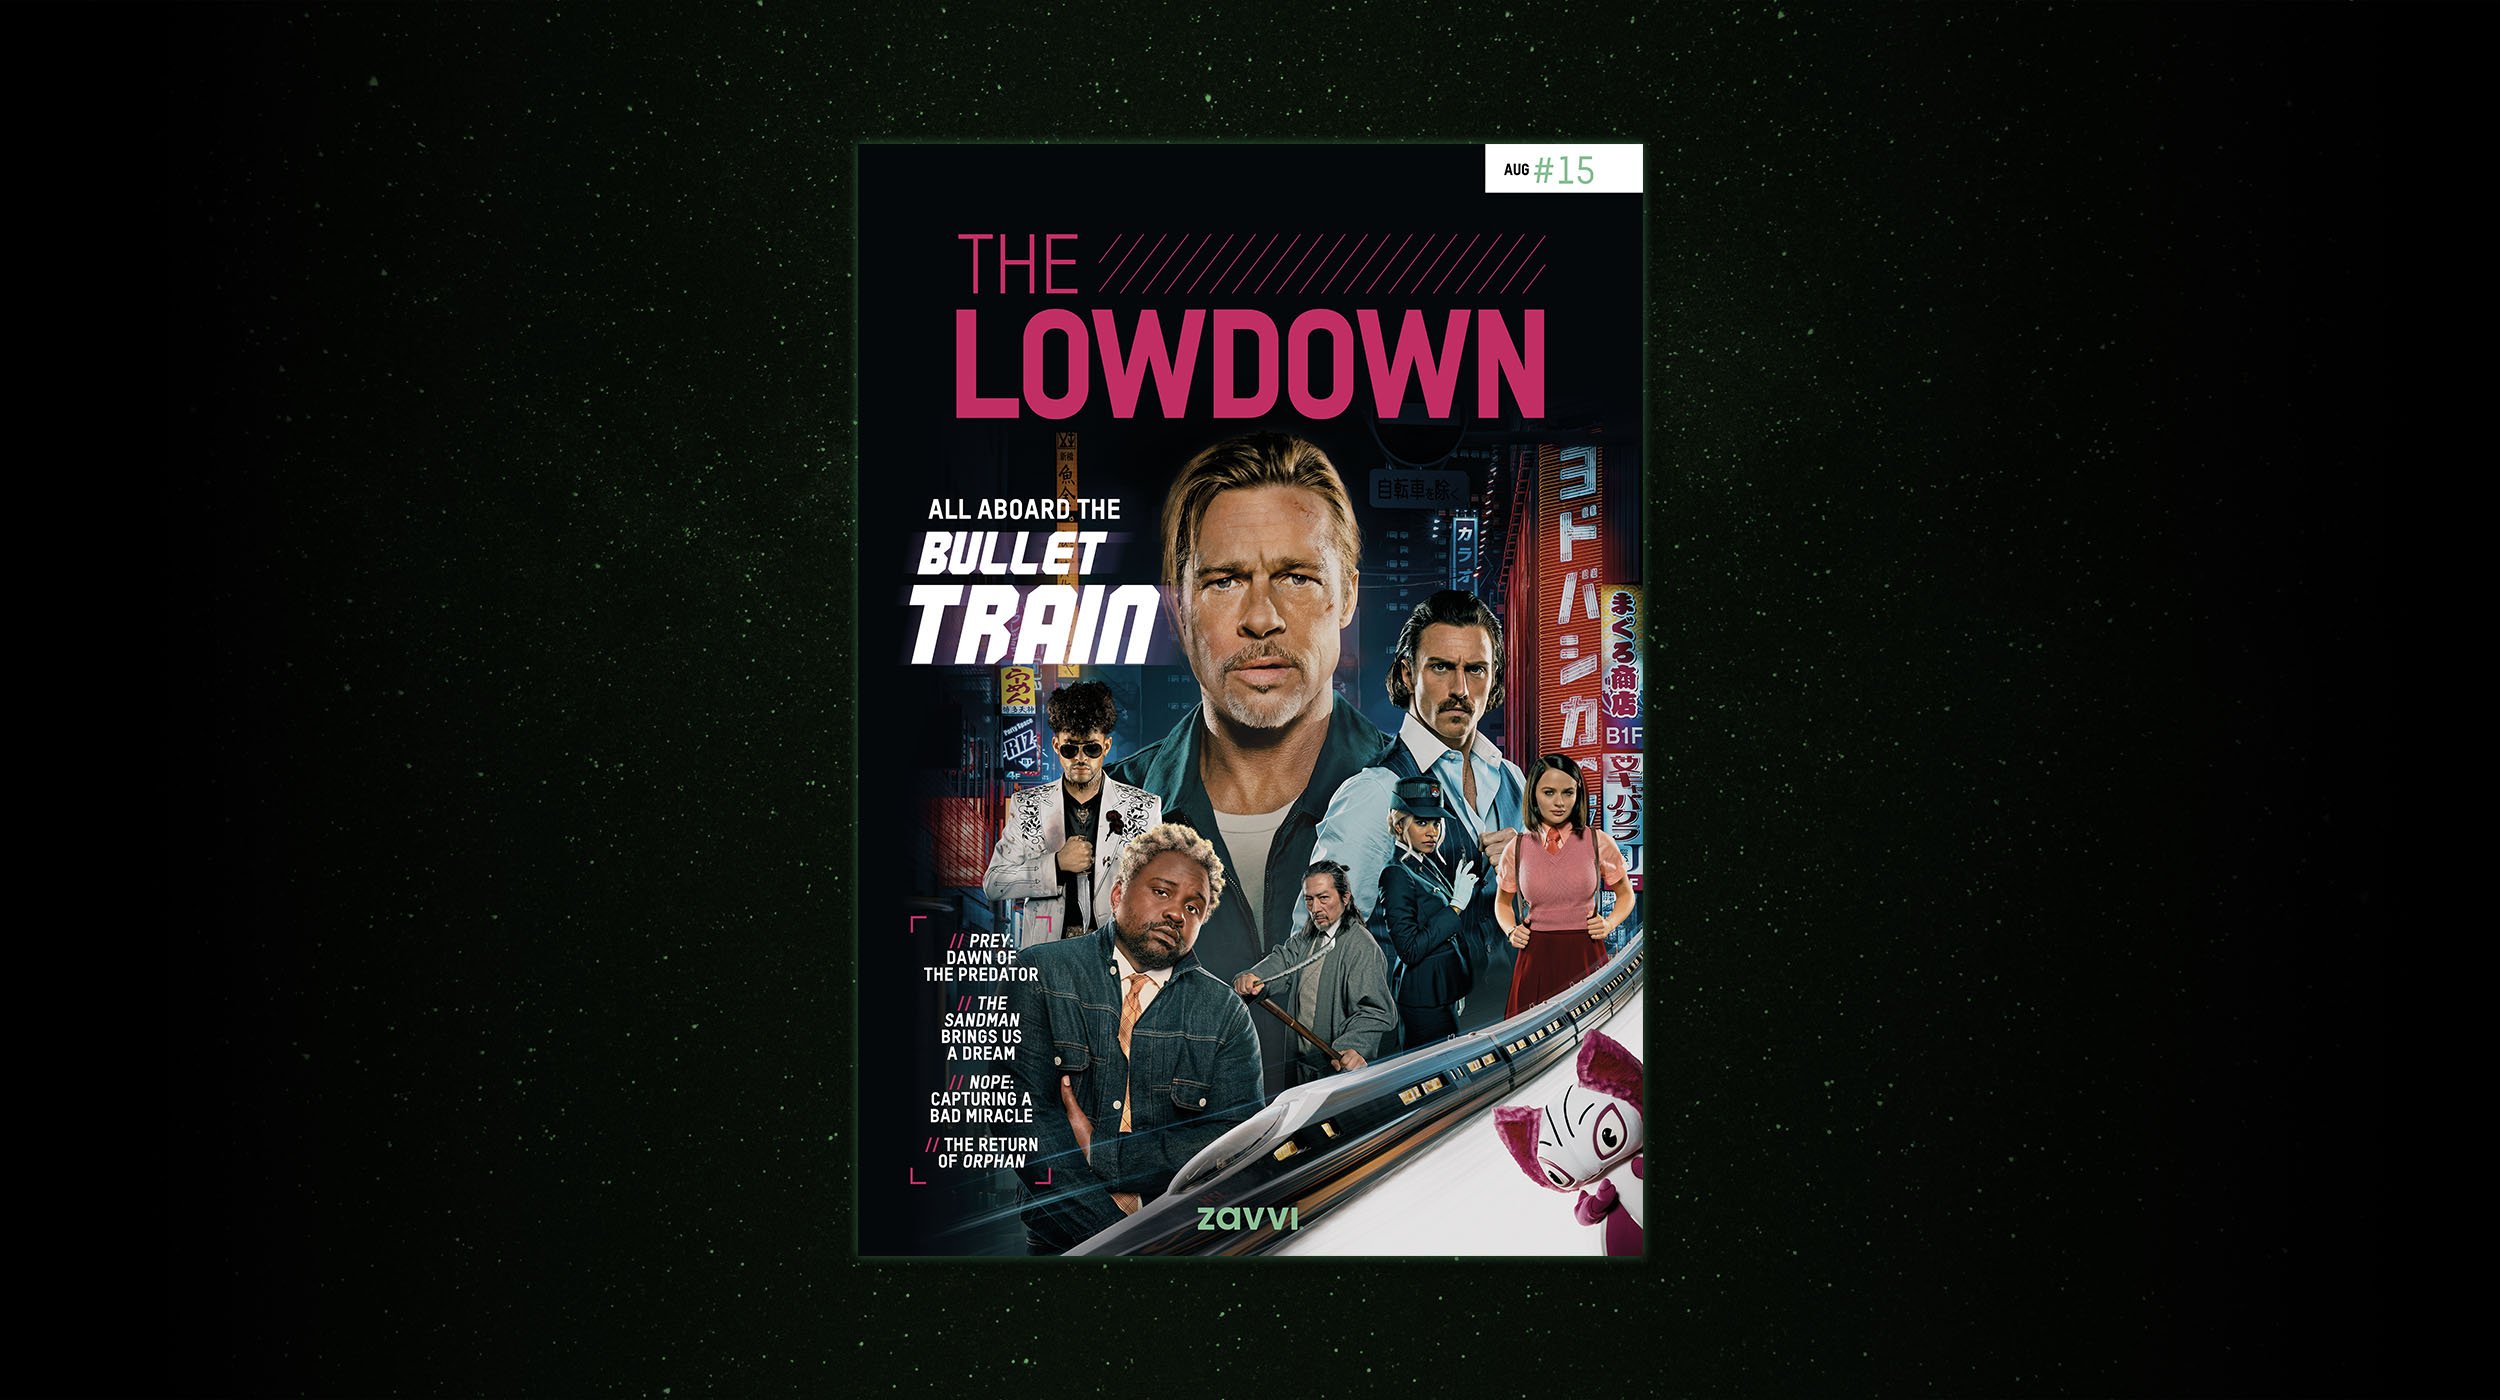 The Lowdown Issue 15: Bullet Train, Prey, The Sandman, And More!